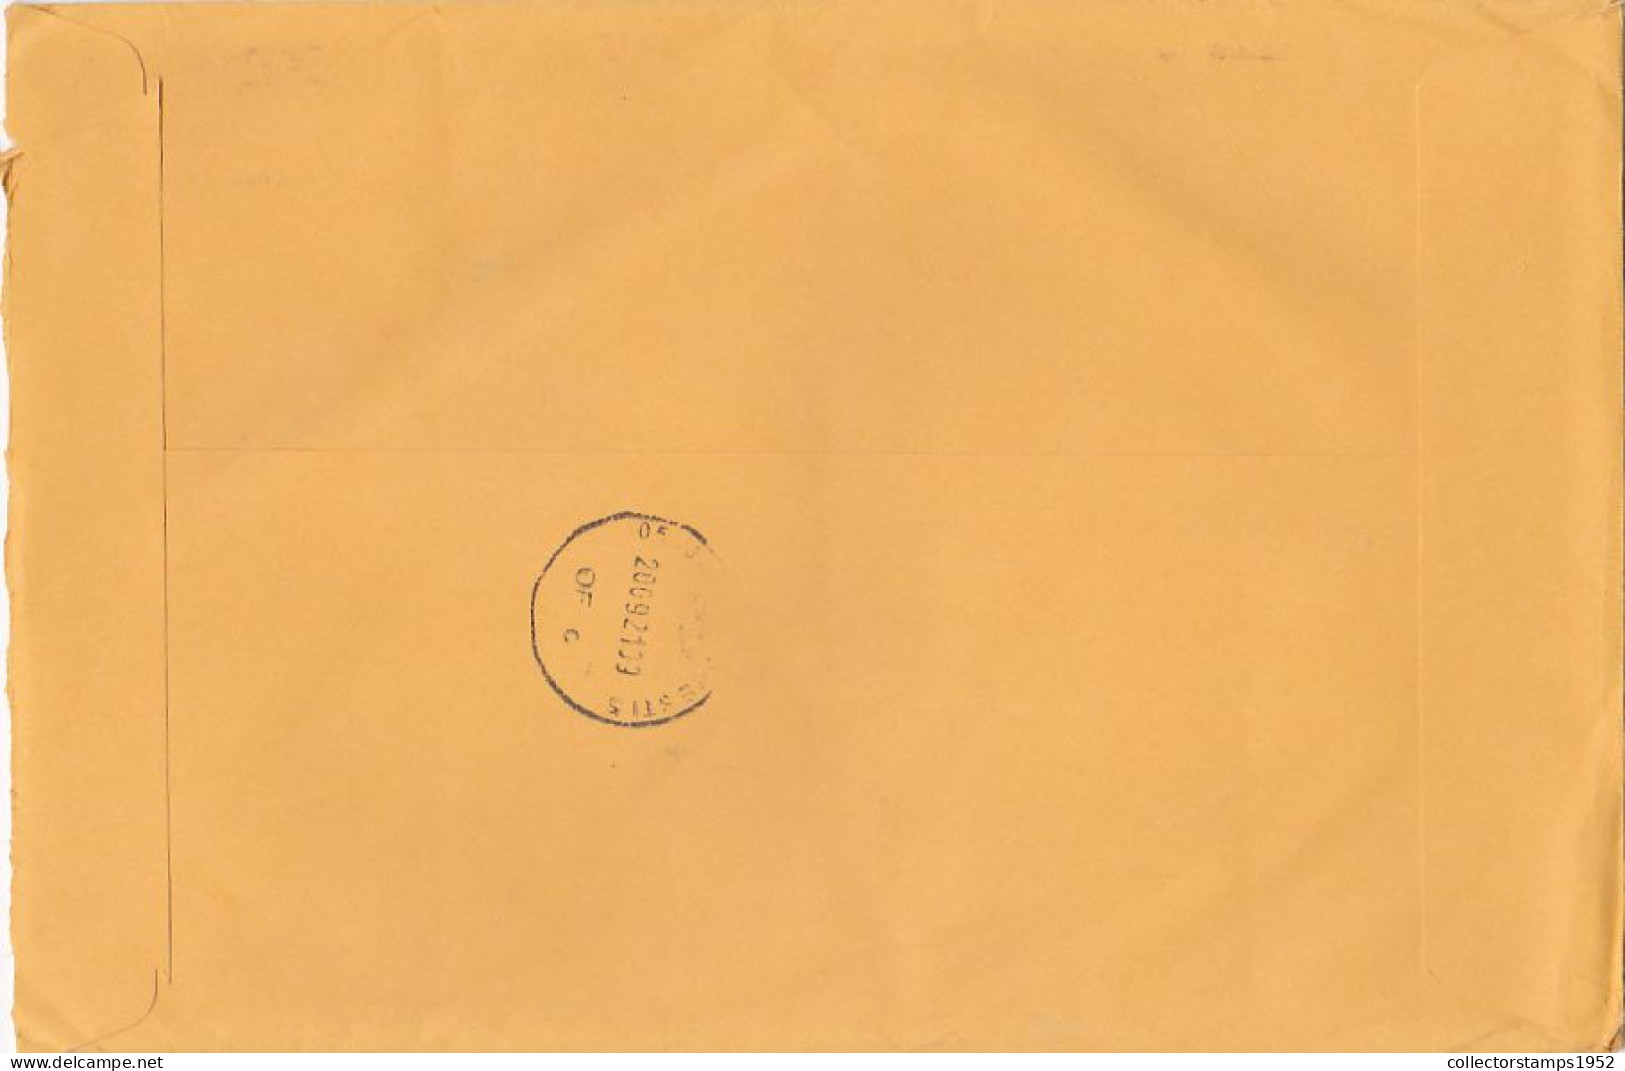 MARINE WILDLIFE, FISHES, CORALS, INVERTEBRATES, CHICAGO FEDERAL BUILDING STAMPS ON COVER, 2021, USA - Lettres & Documents